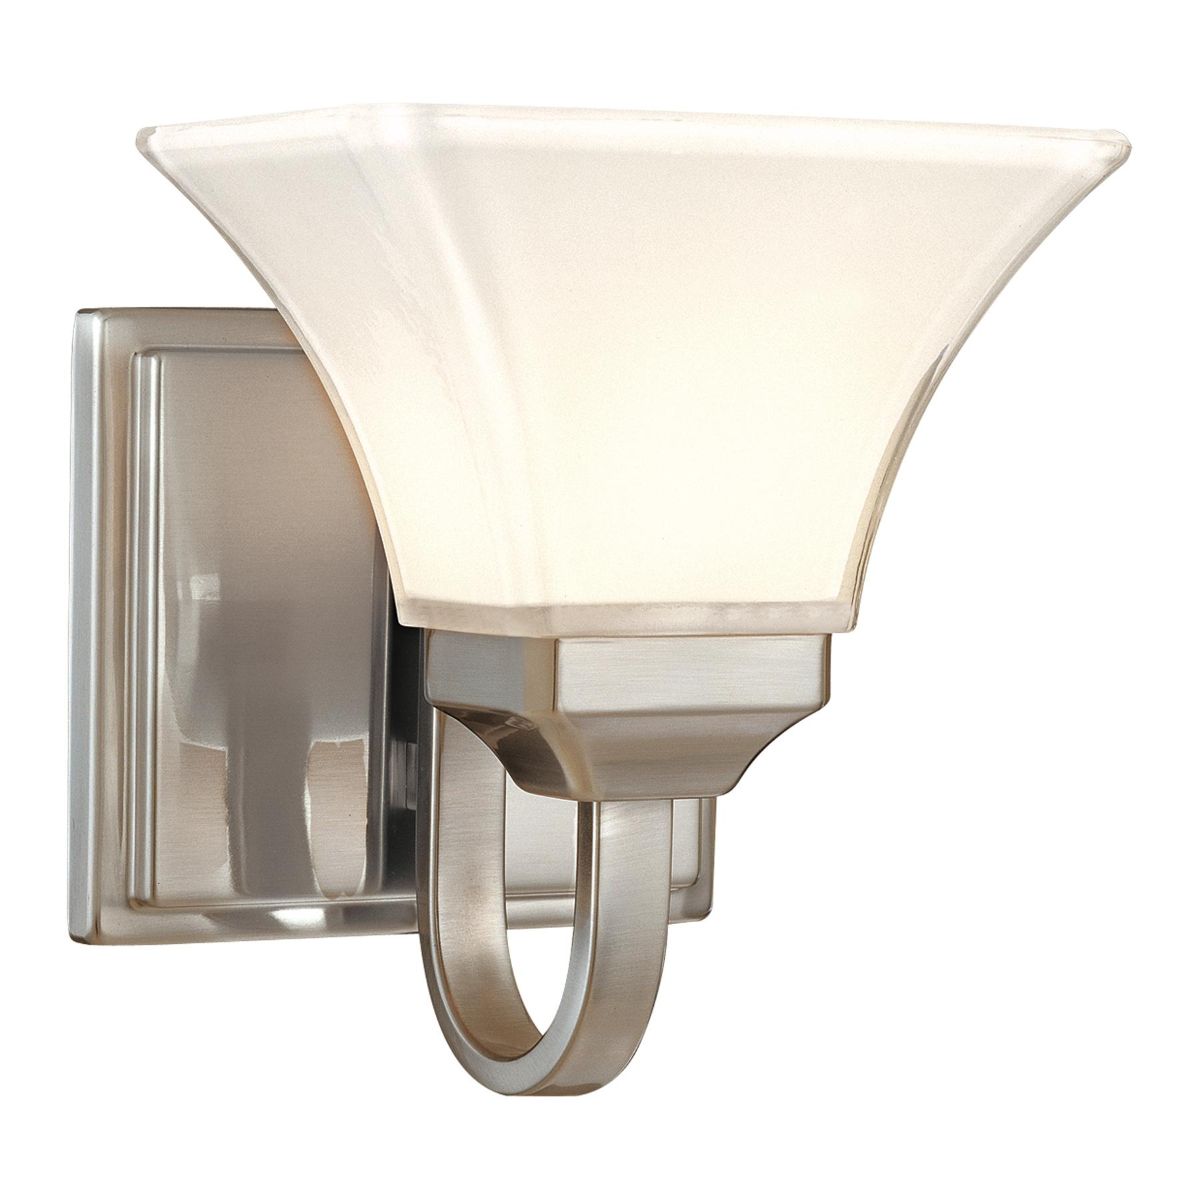 Agilis 9 in. Wall Sconce